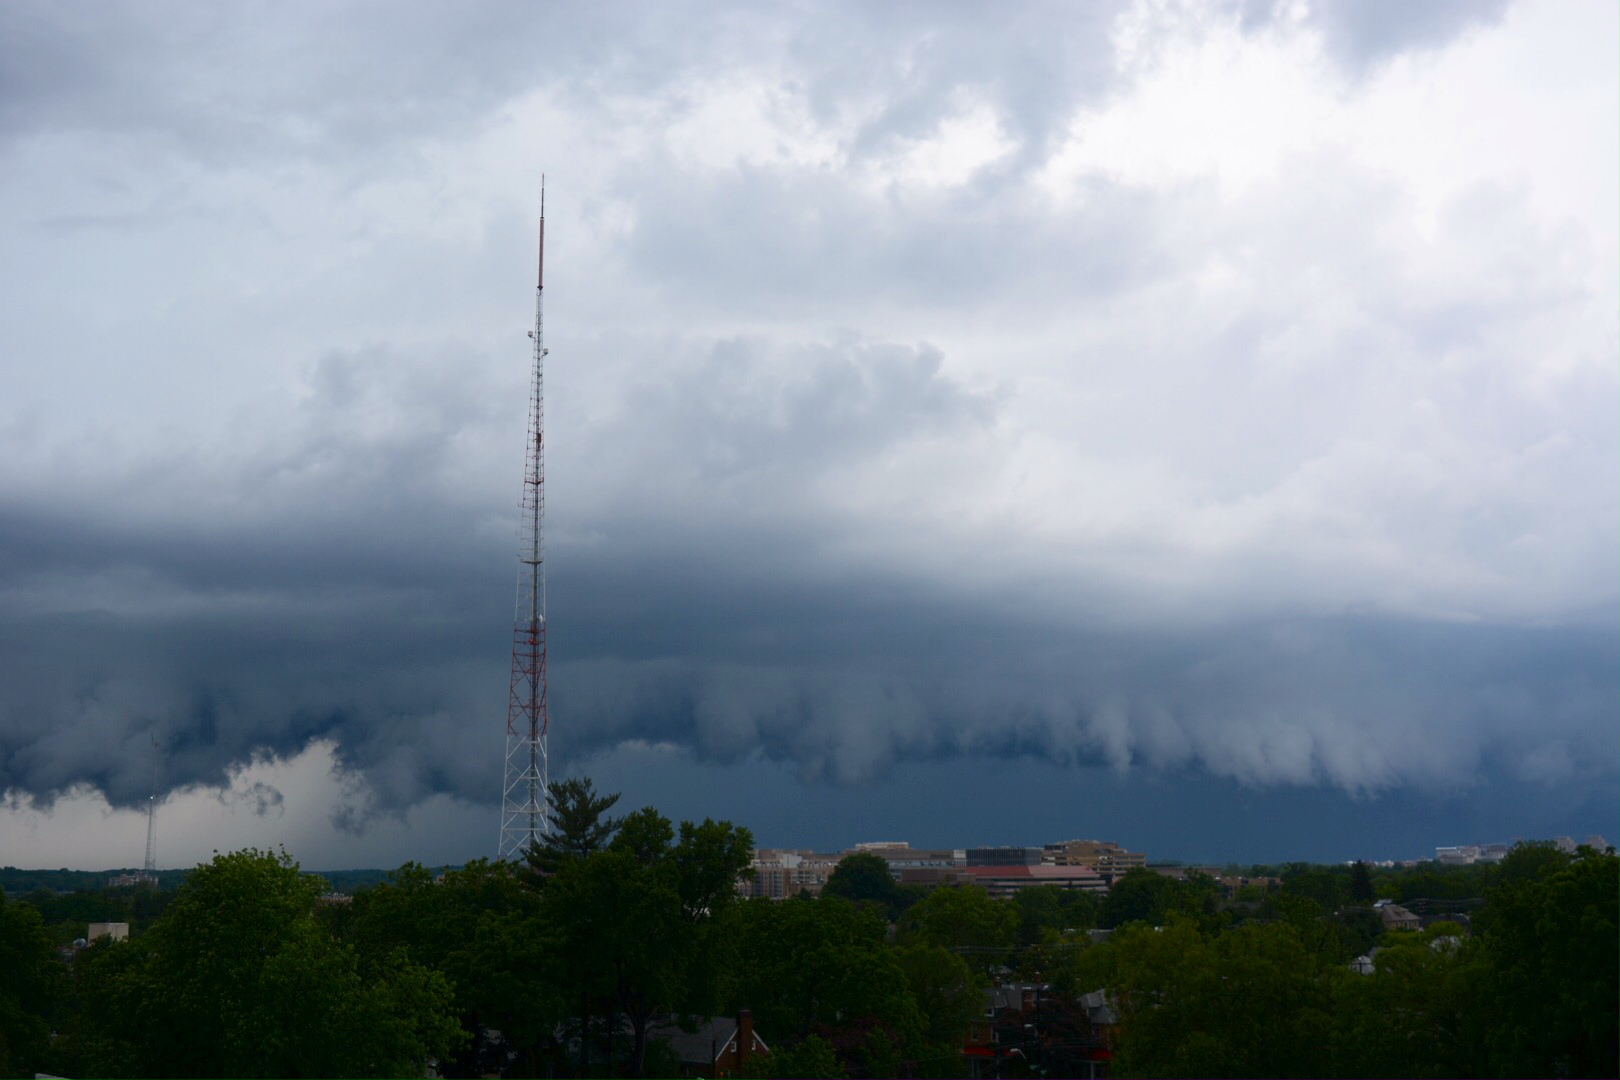 Stormy, steamy Father’s Day weekend weather for DC area